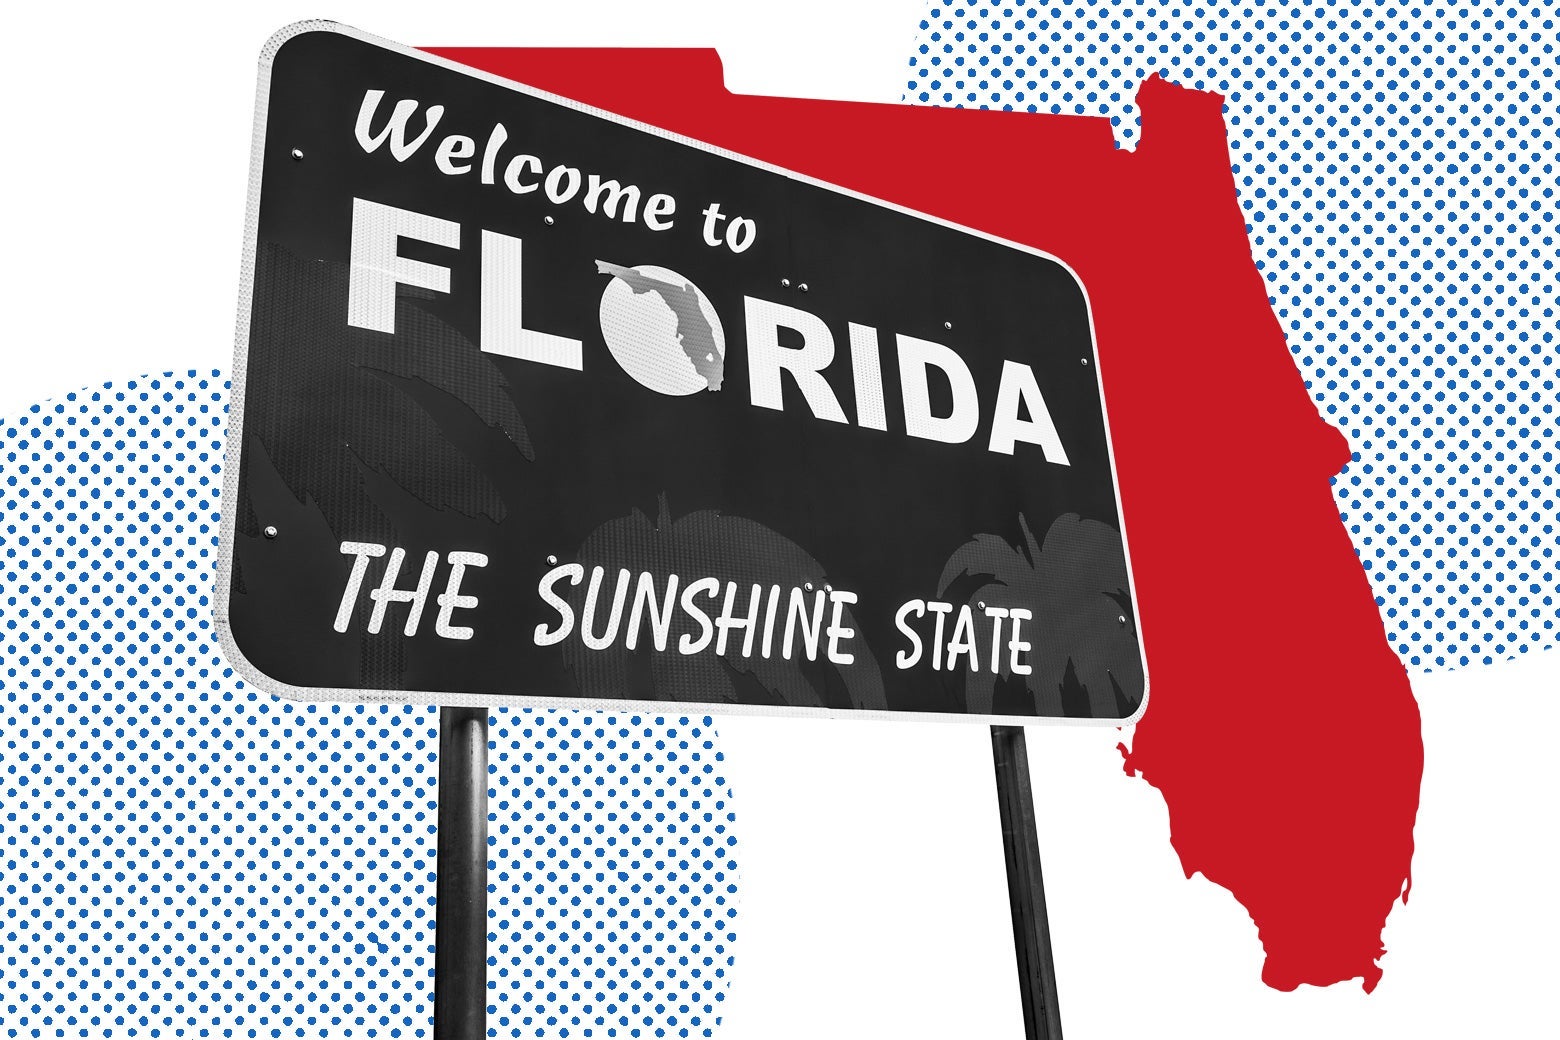 A sign reads "Welcome to Florida, the Sunshine State" in front of an outline of the state.